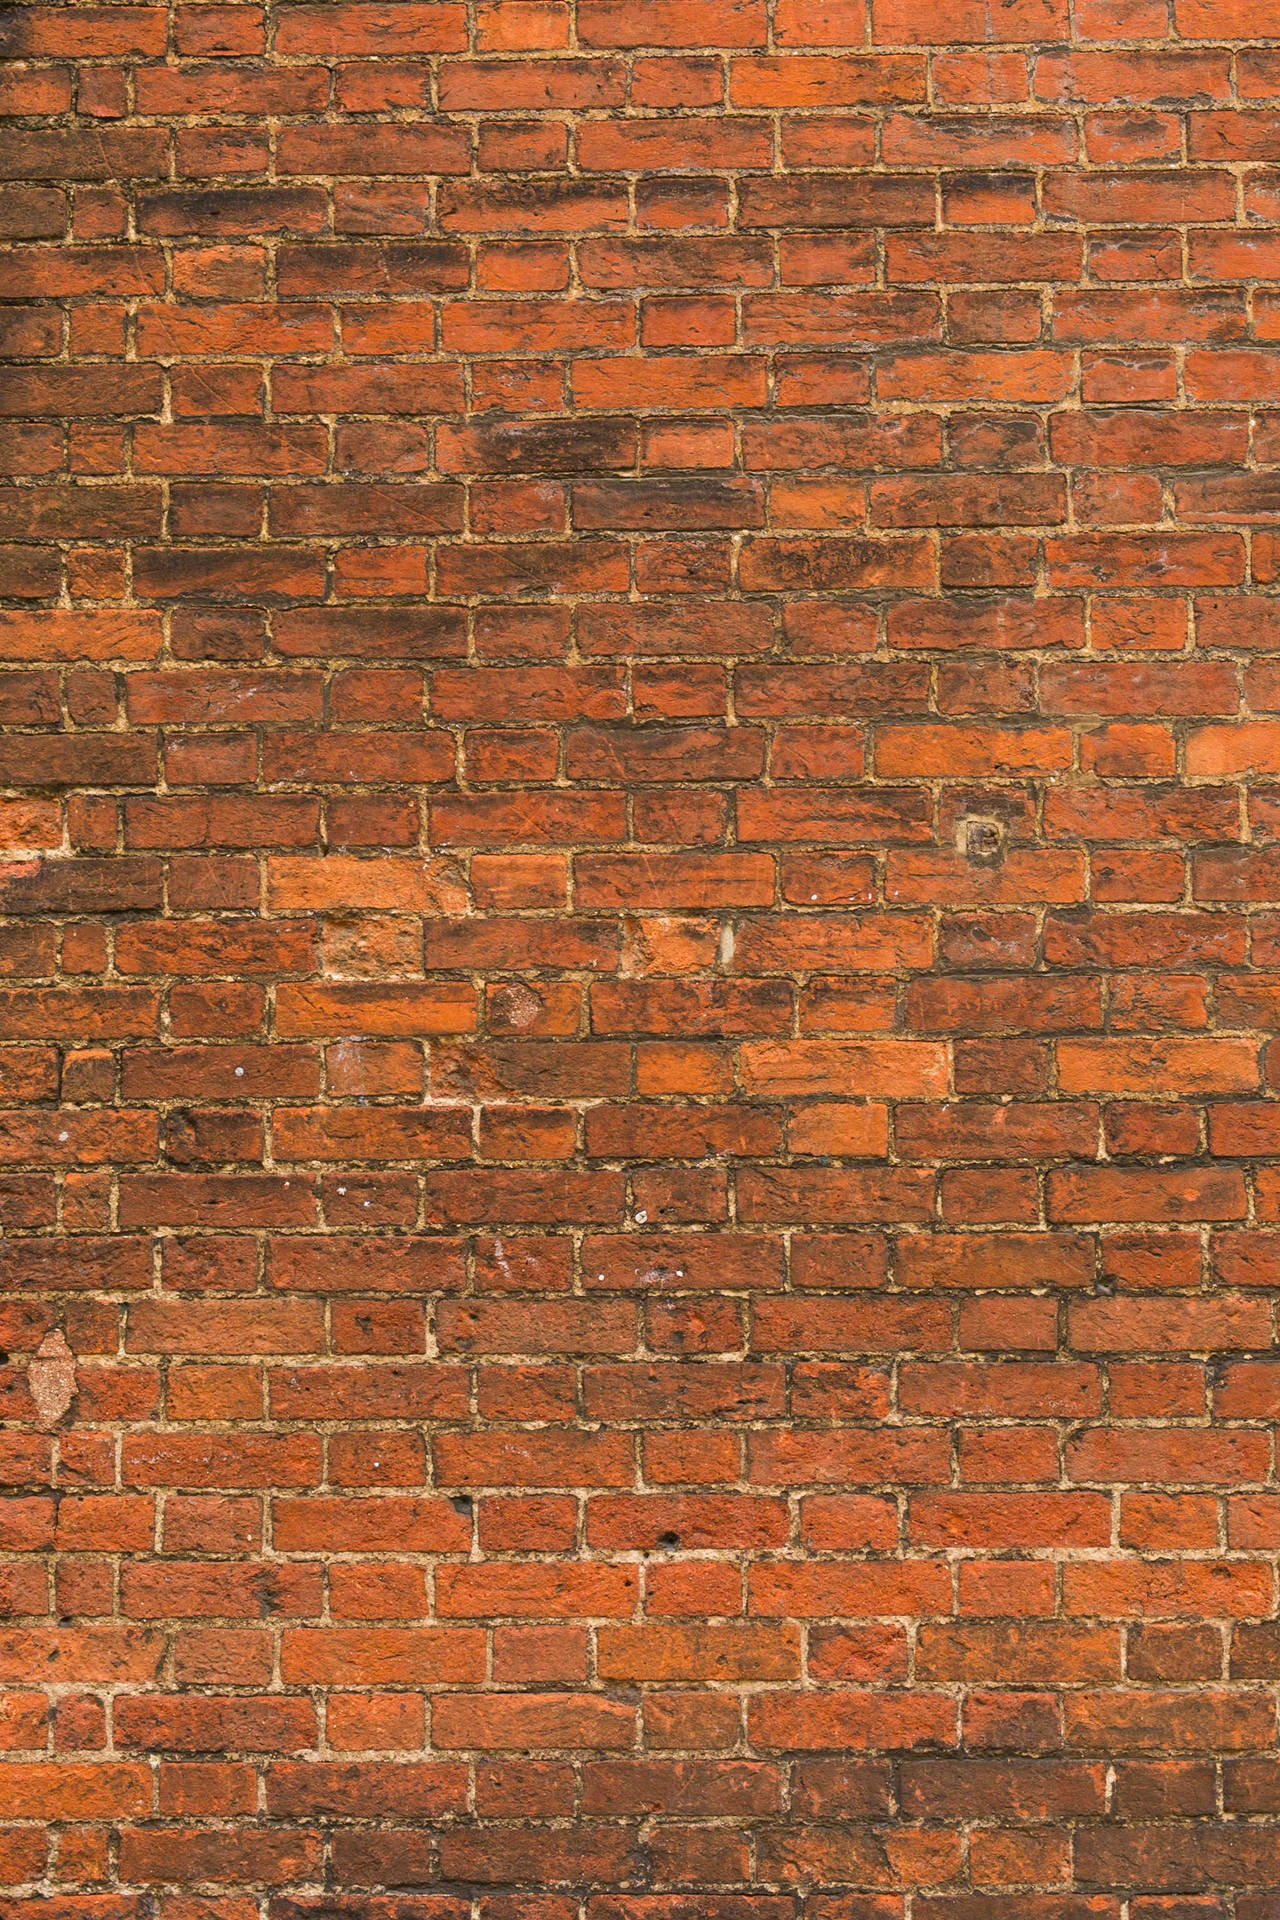 Brick 3333X5000 Wallpaper and Background Image